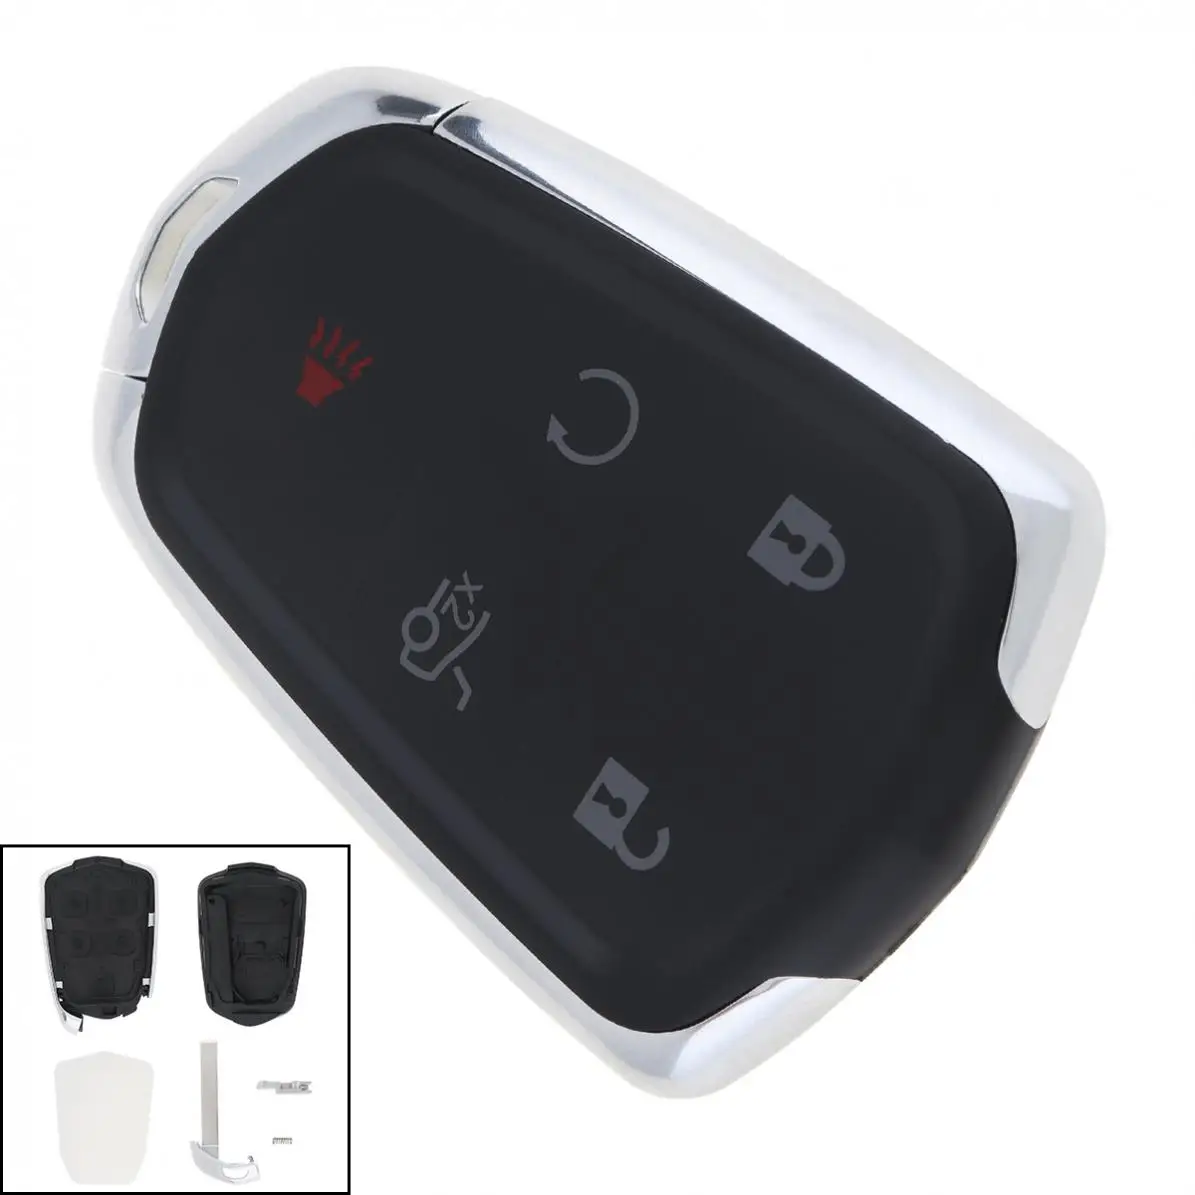 

5 Buttons Black Keyless Entry Car Replacement Key Remote Fob Shell Case for Cadillac ATS CT6 CTS SRX XT5 XTS